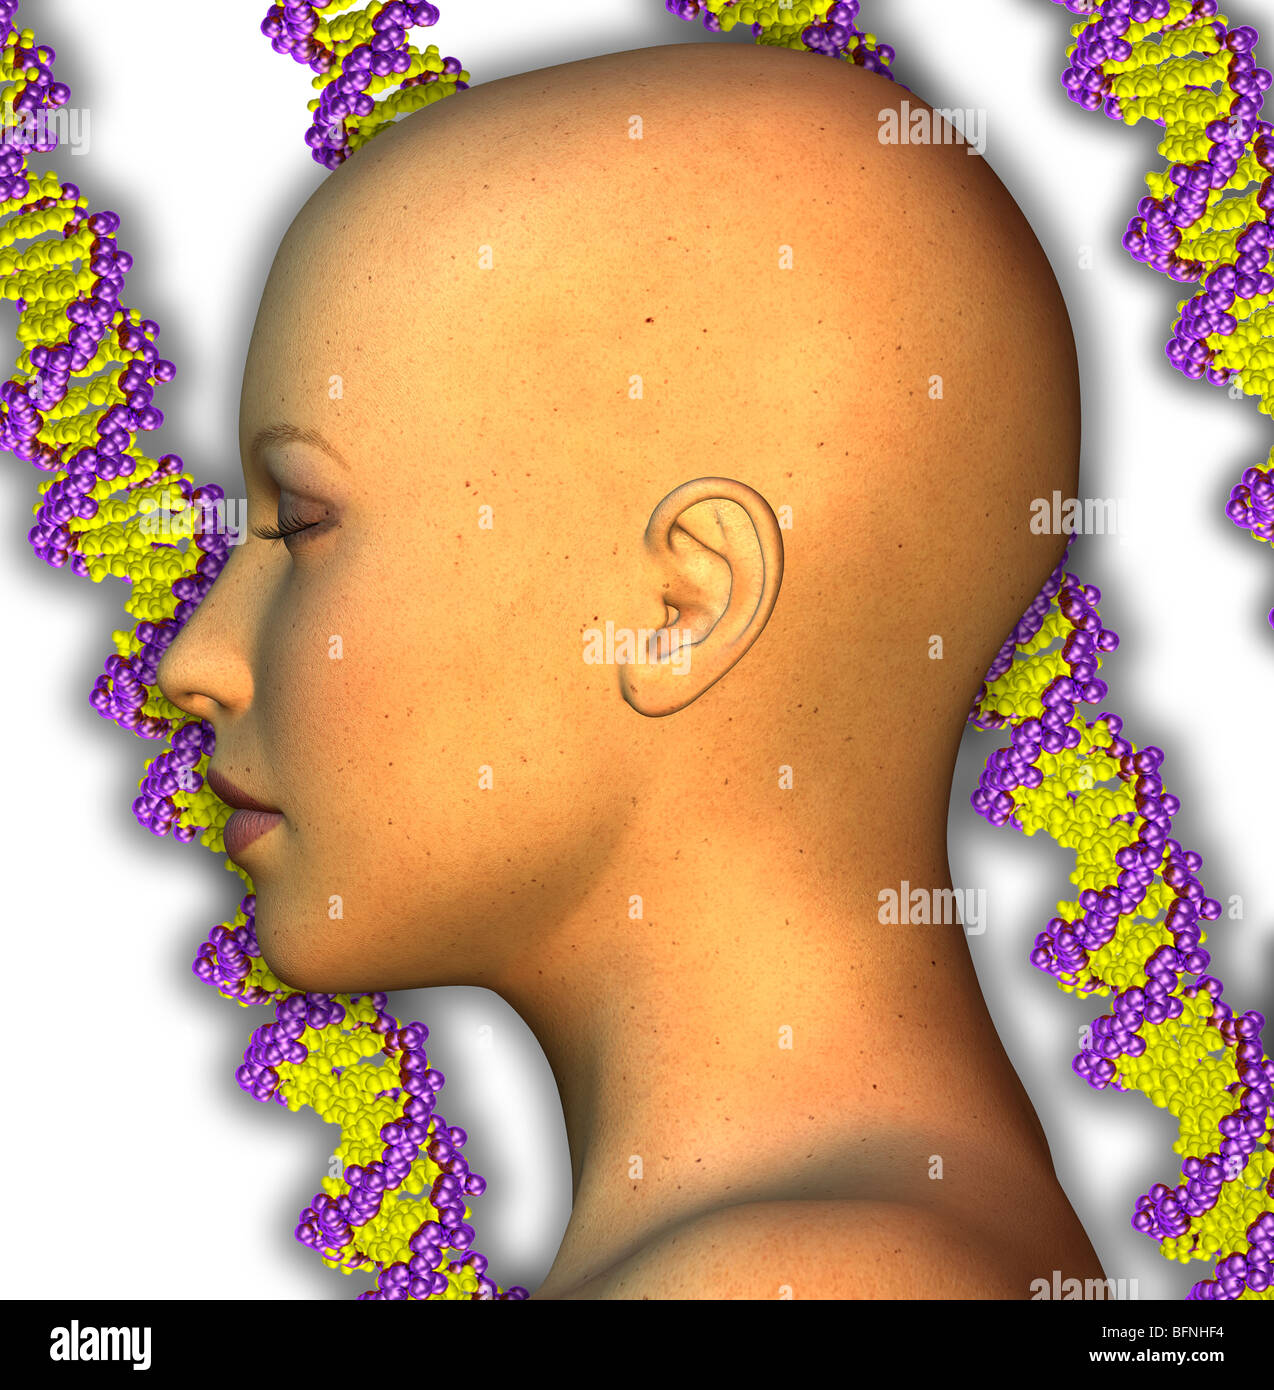 Illustration of a woman's face superimposed over strands of DNA Stock Photo